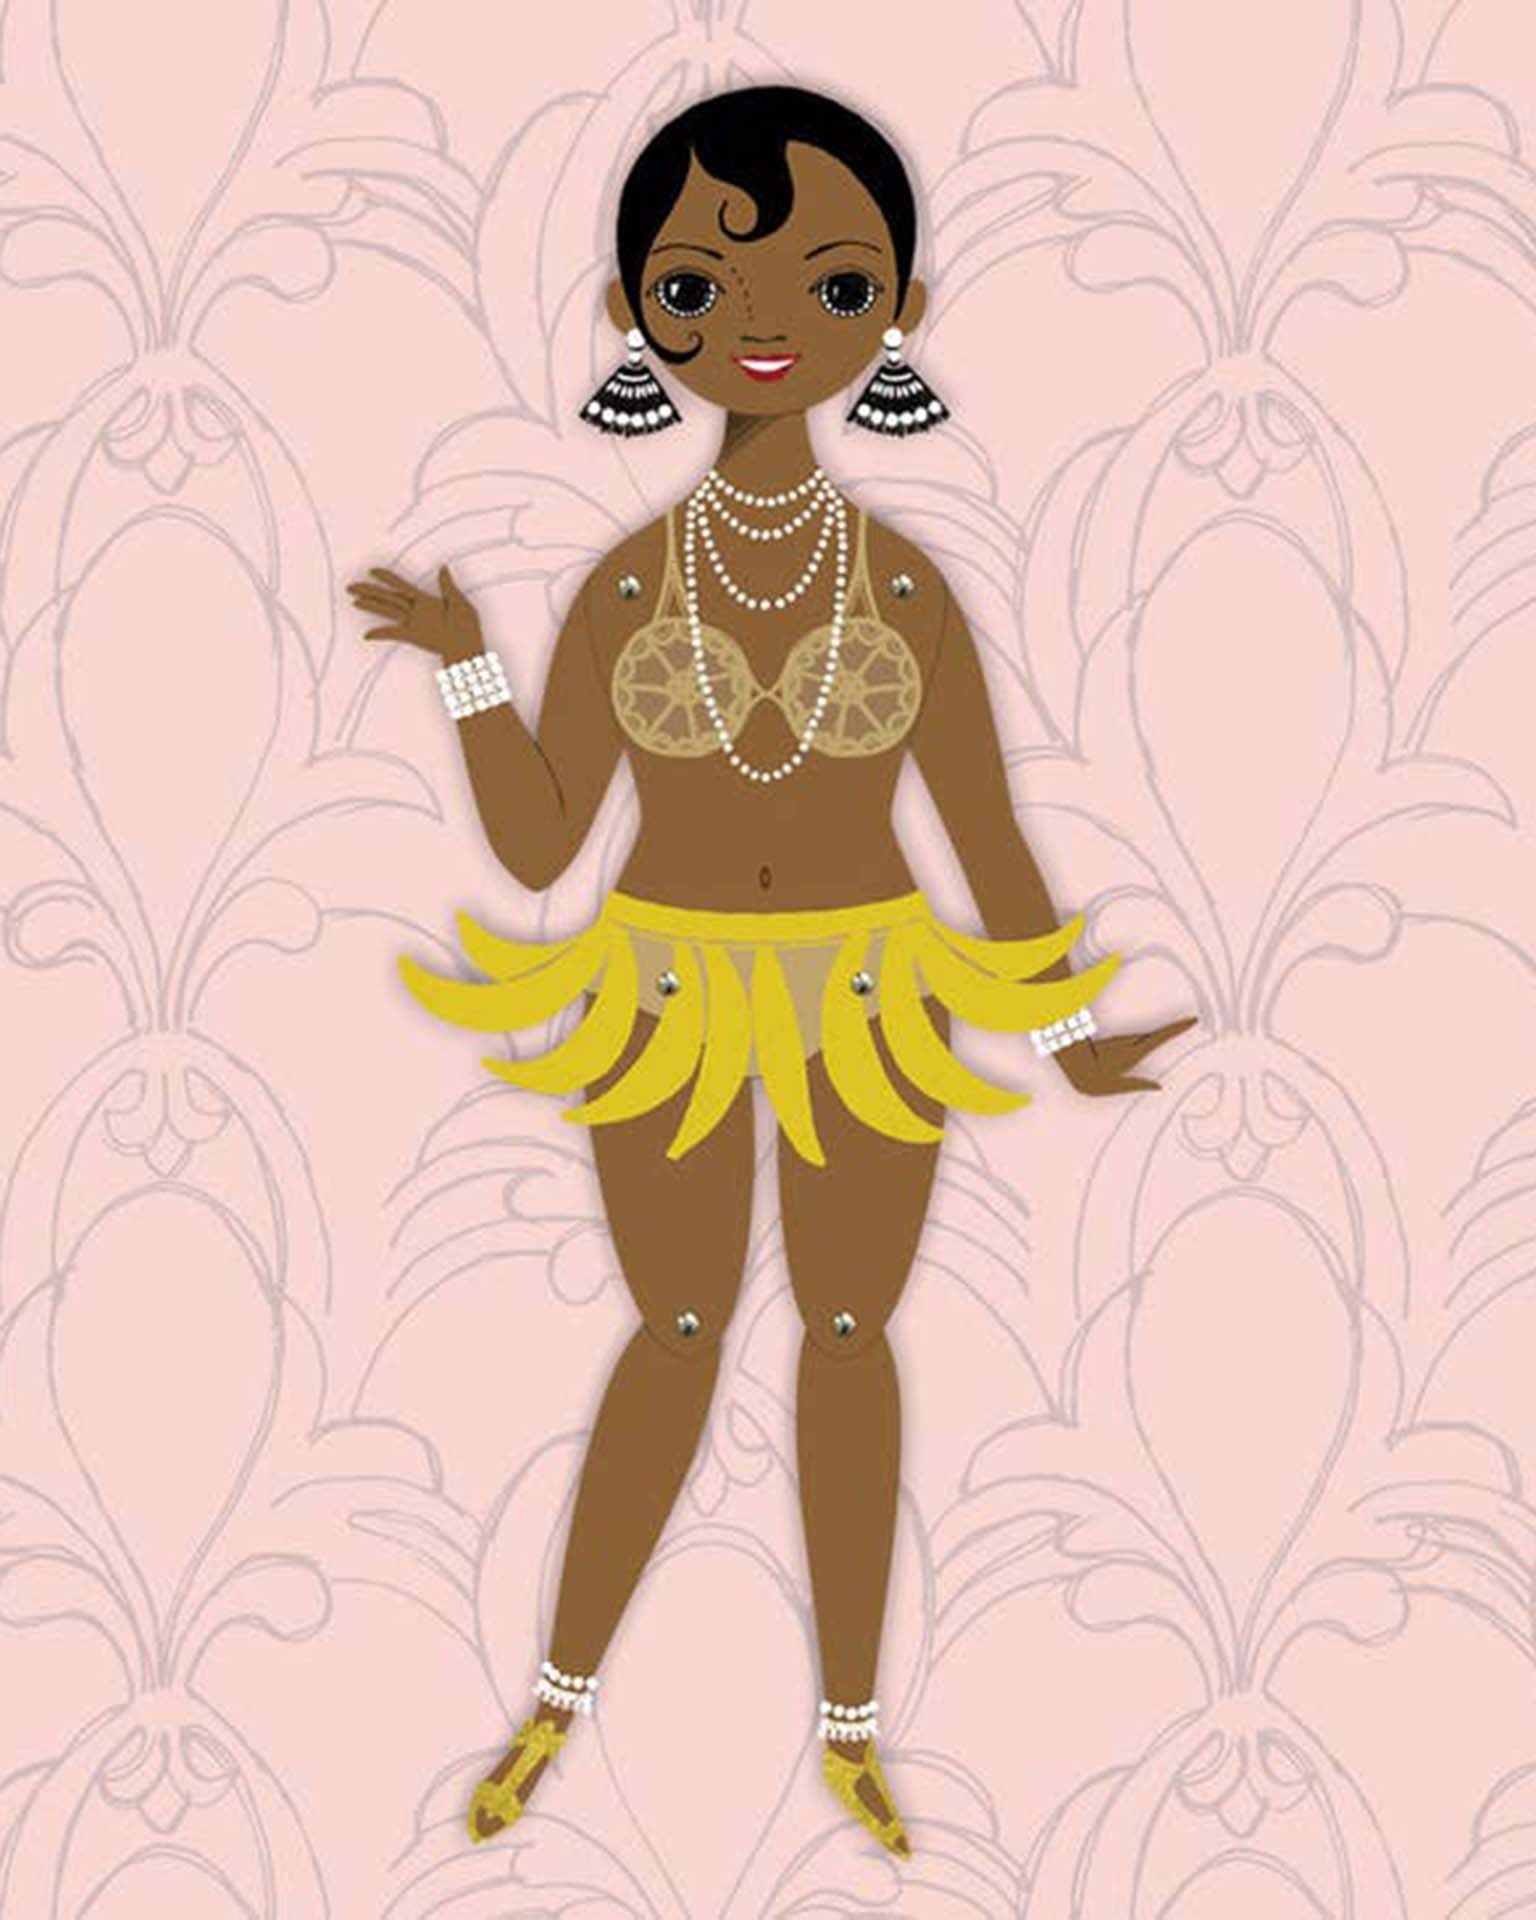 Little of unusual kind play Josephine Baker paper doll